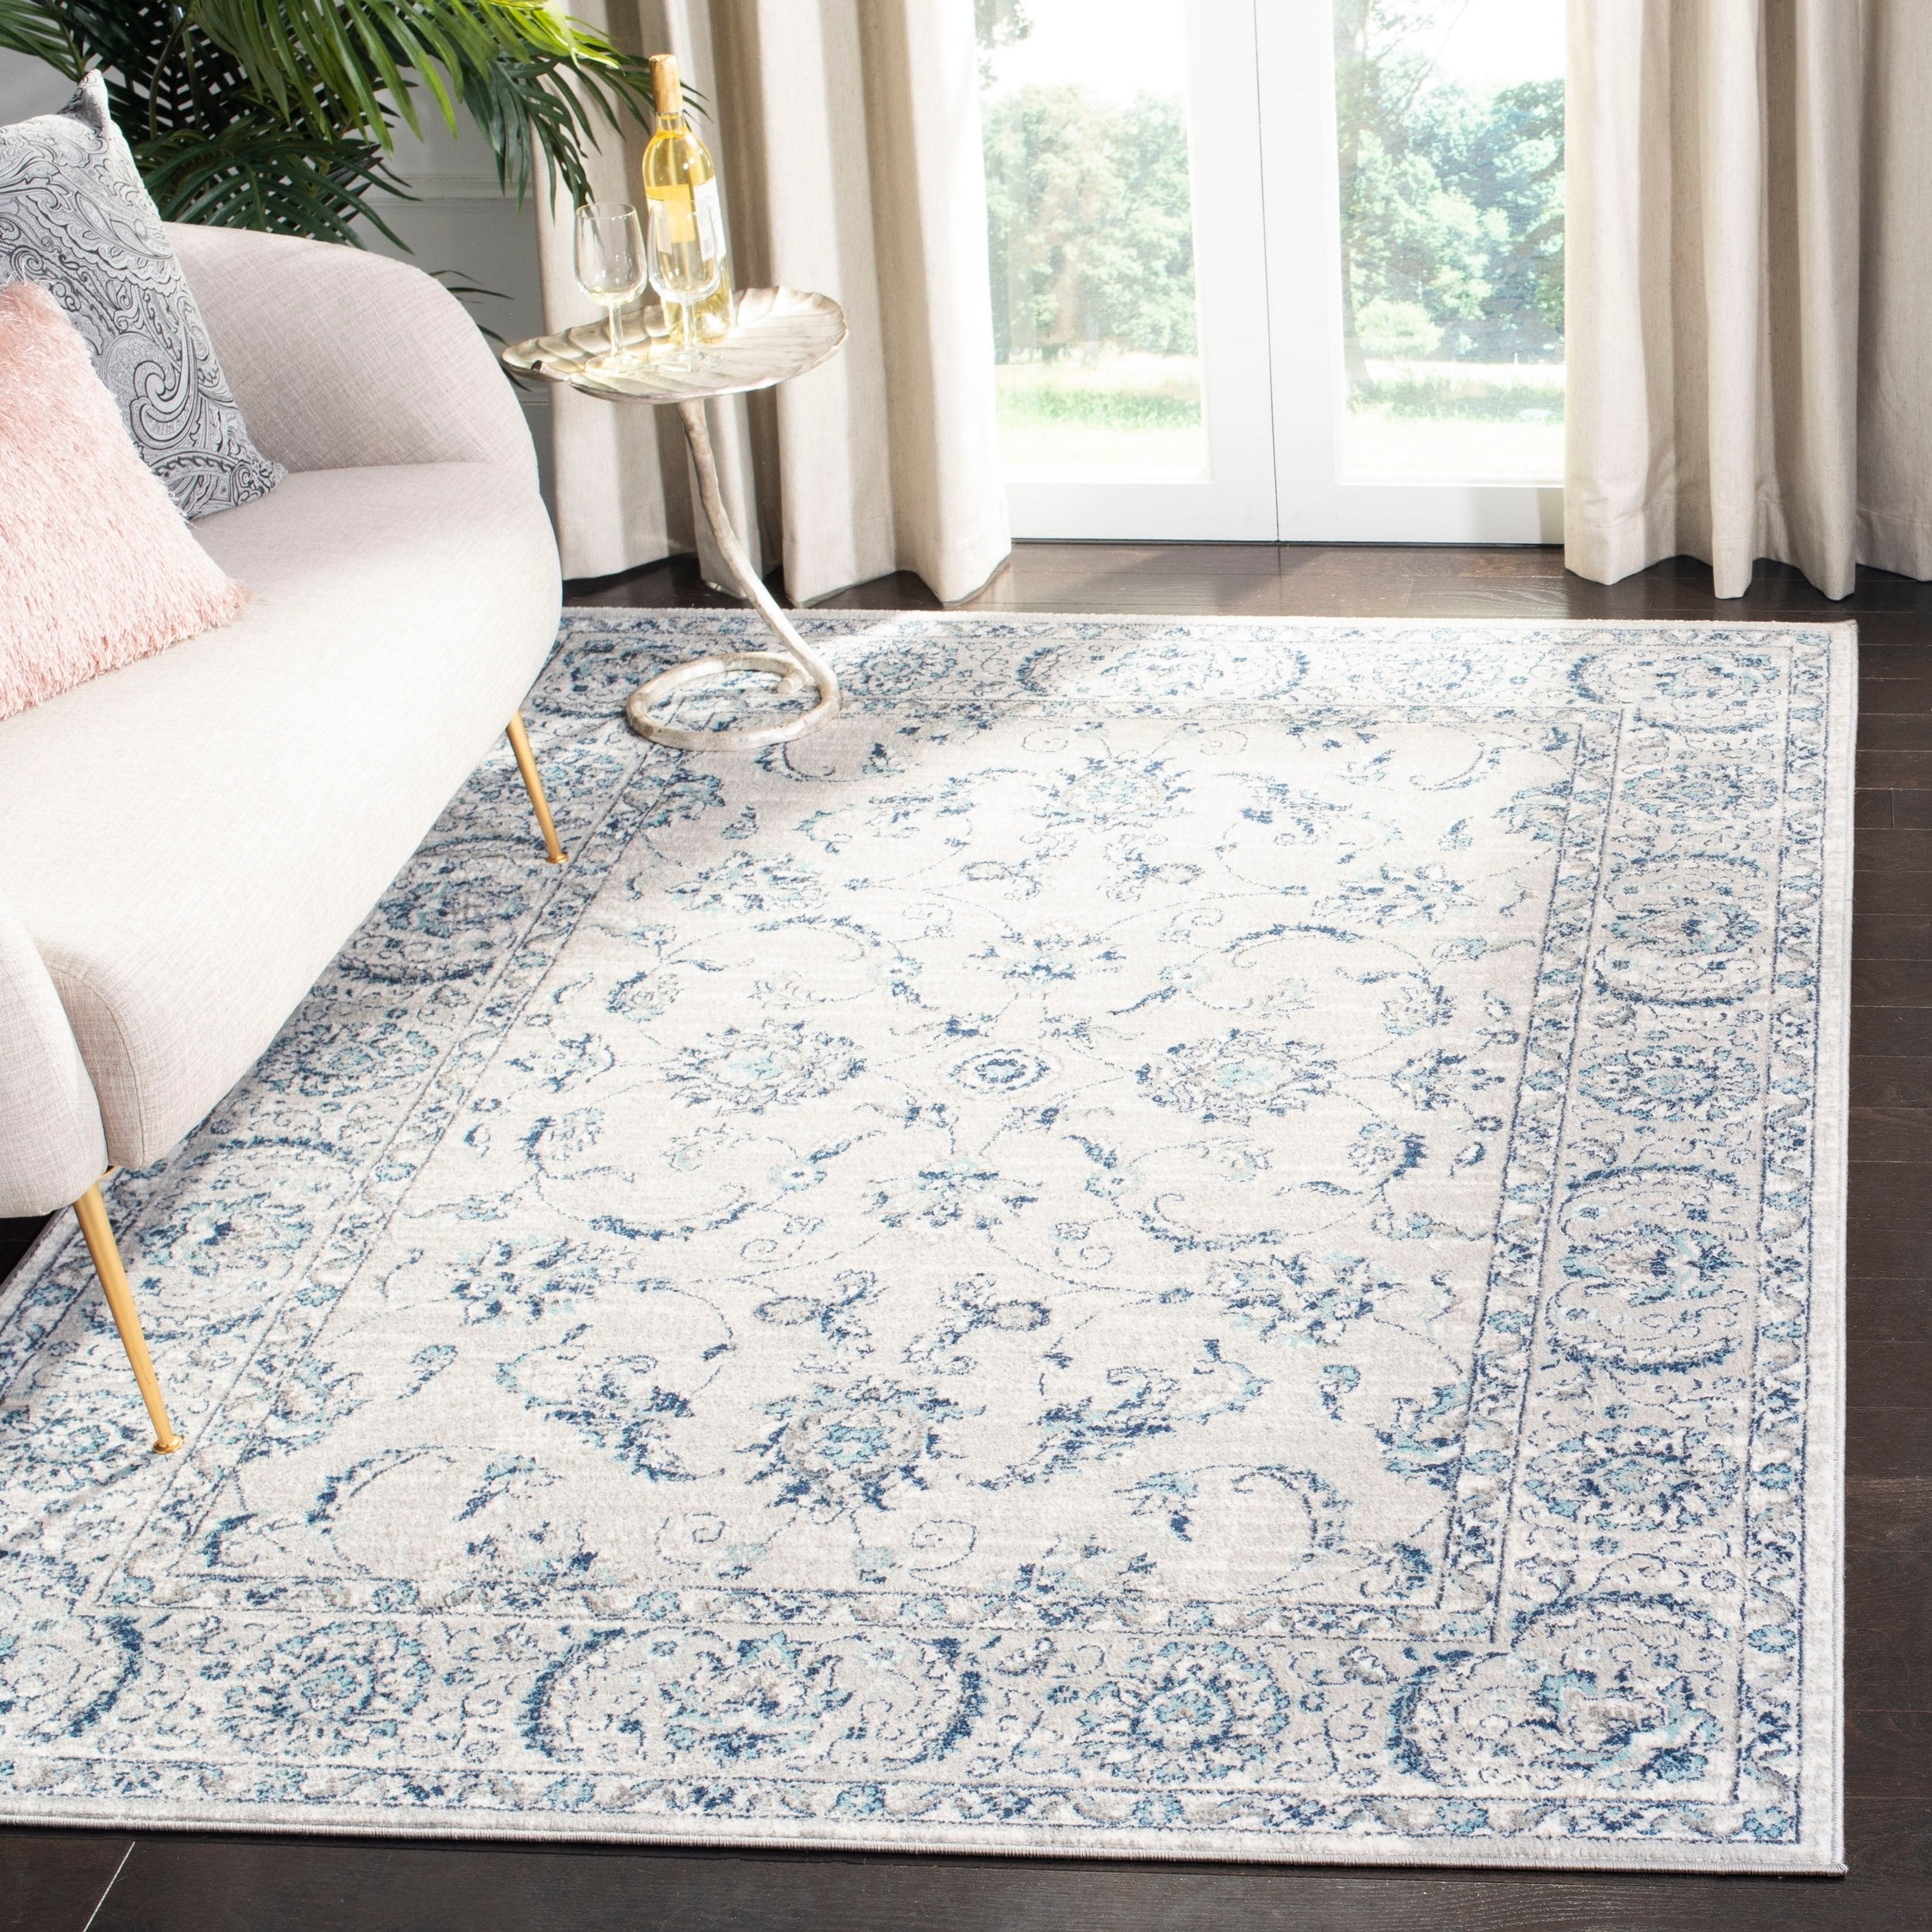 SAFAVIEH Brentwood Collection 4' x 6' Ivory/Navy BNT802D Medallion  Distressed Non-Shedding Entryway Living Room Foyer Bedroom Accent Rug 